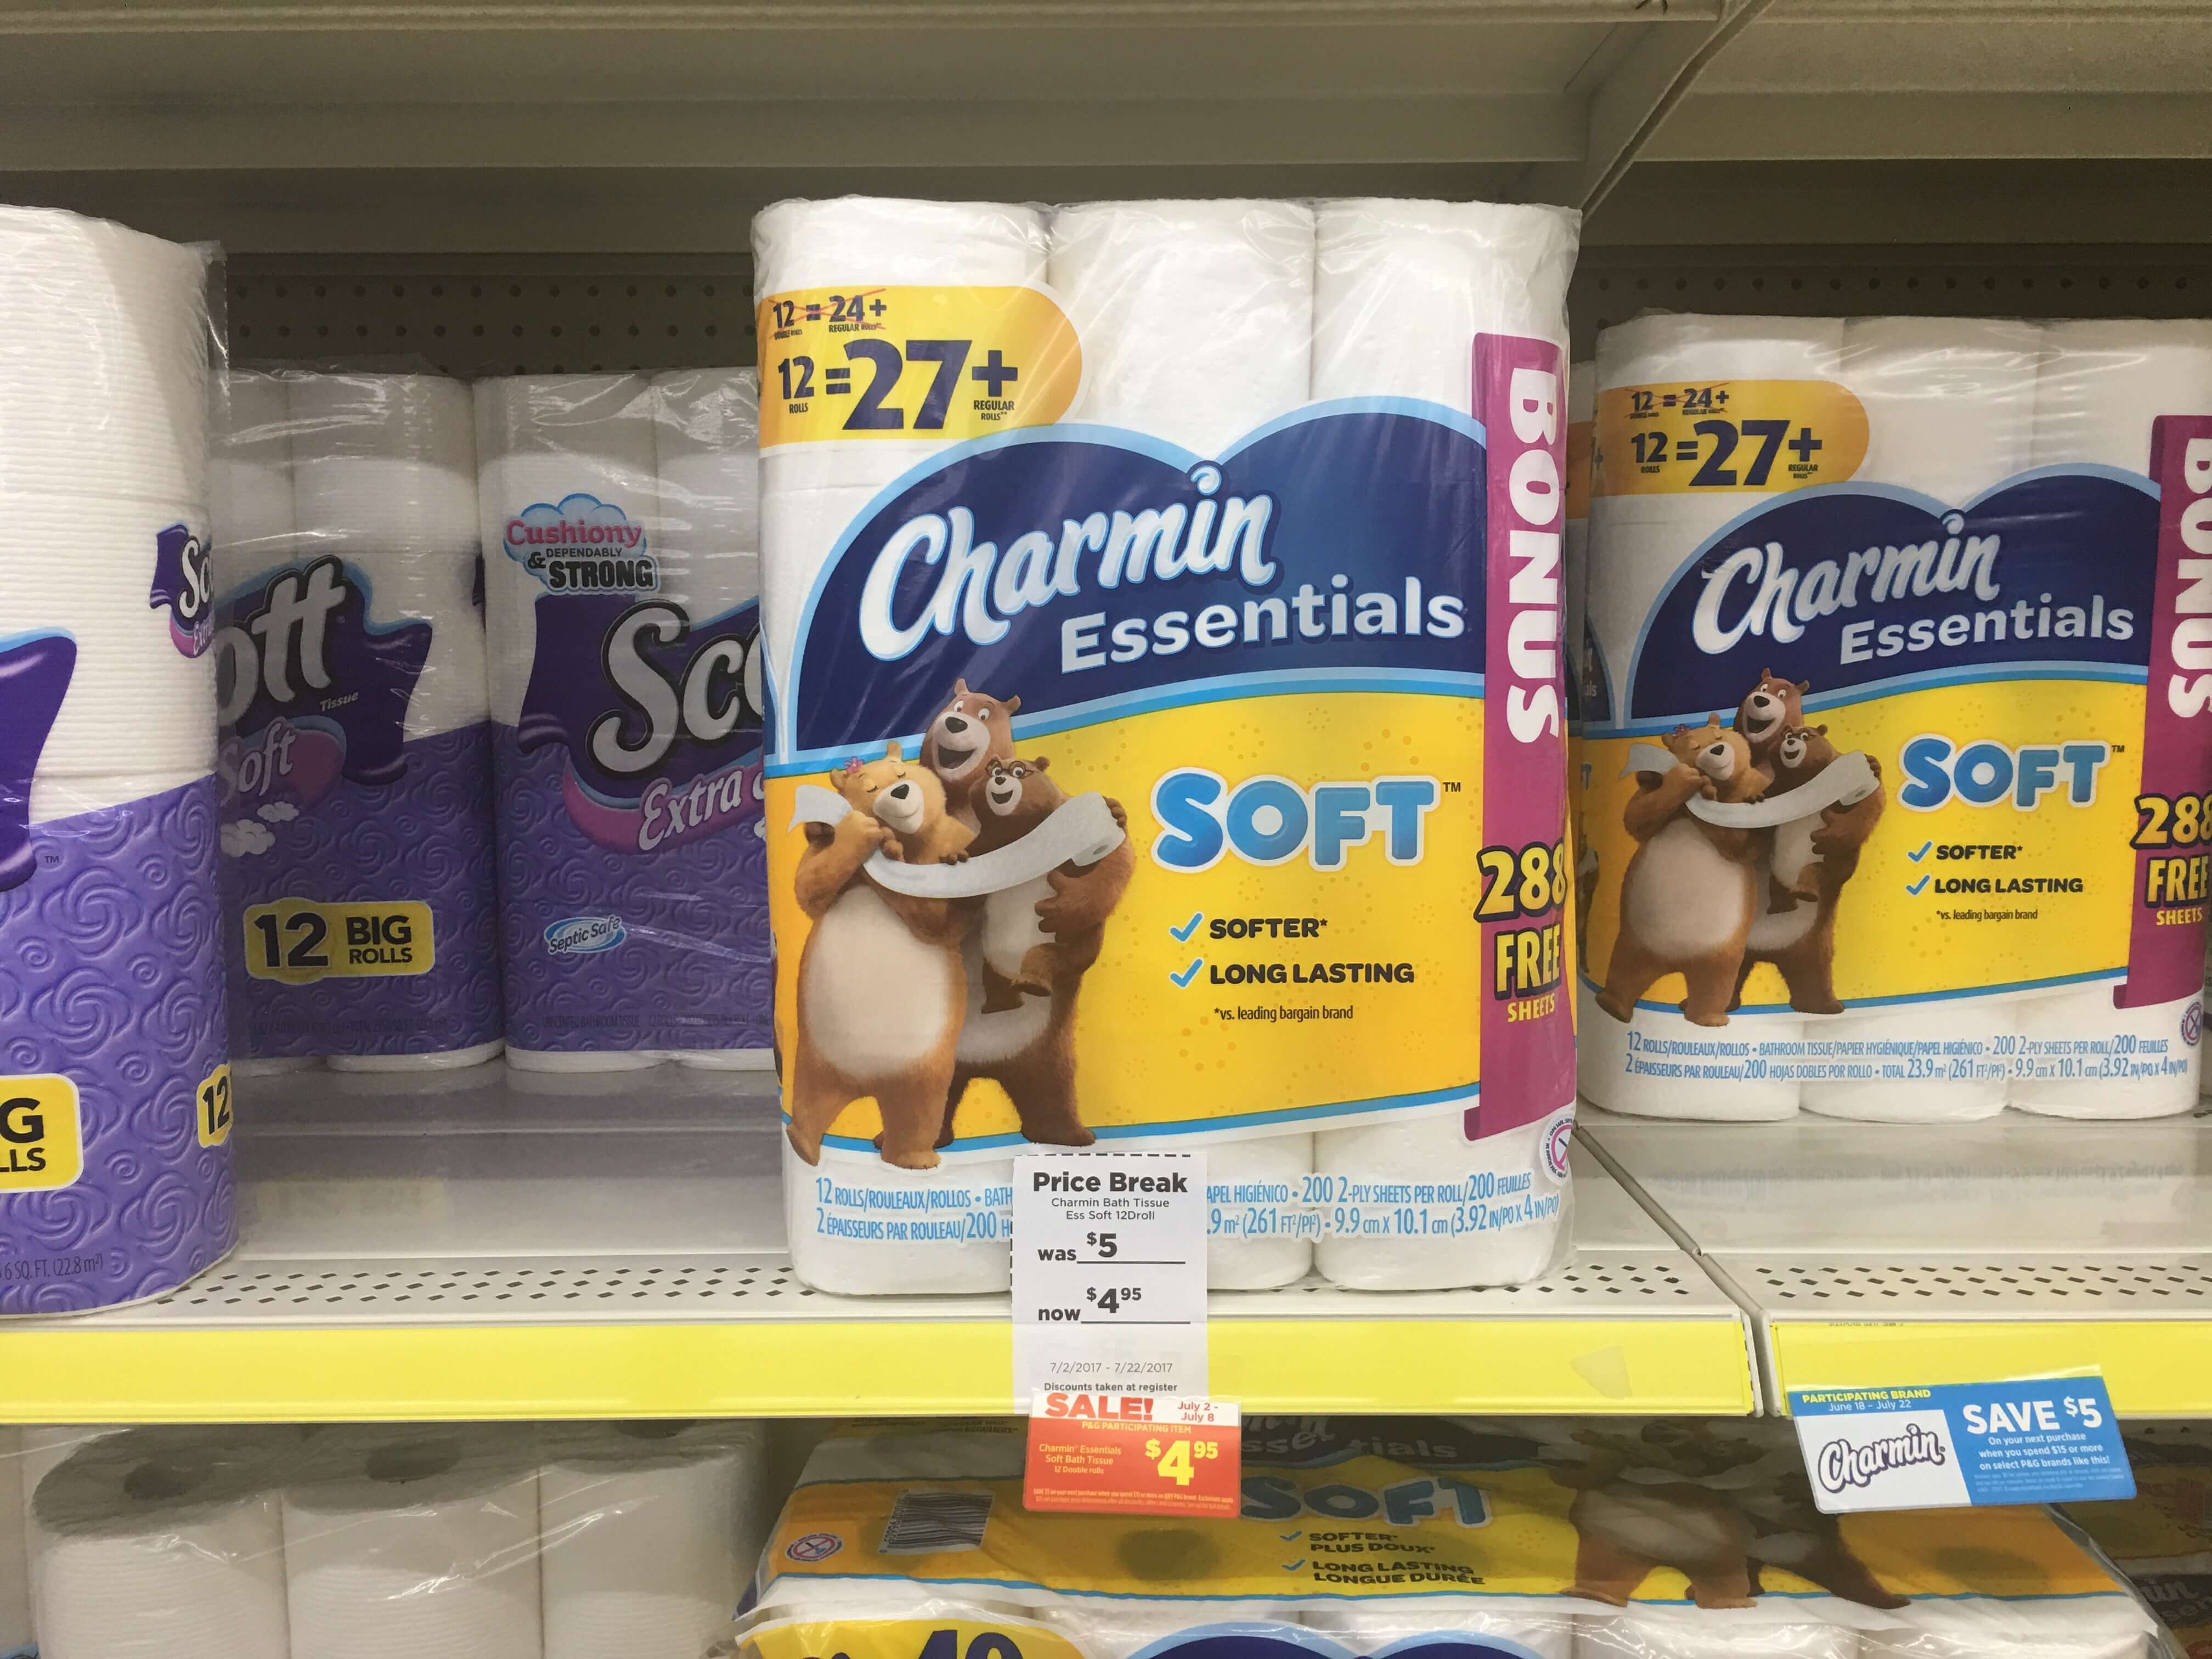 Dollar General on X: Save on P&G products you love at your local Dollar  General.   / X